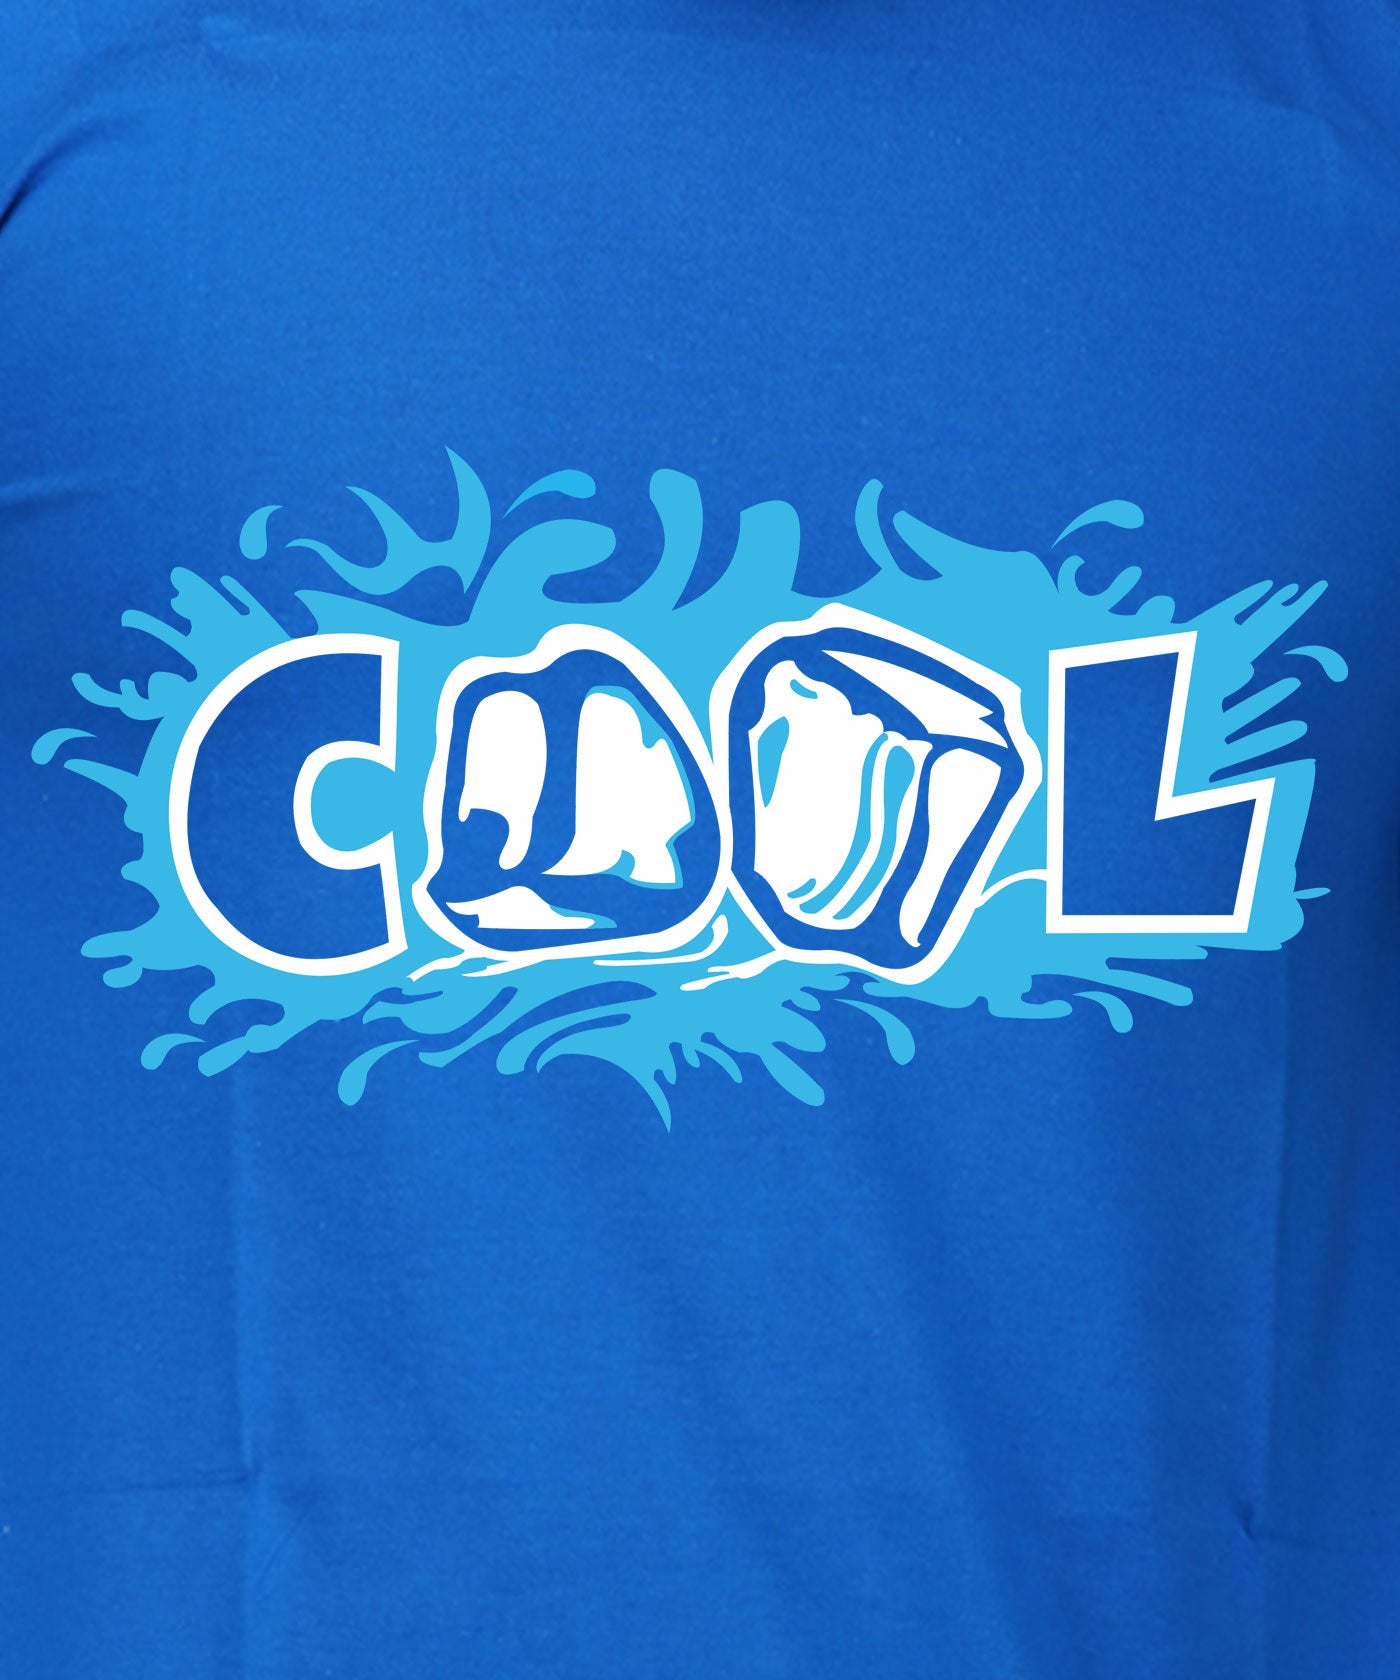 Ice Cool - Premium Round Neck Cotton Tees for Men - Electric Blue